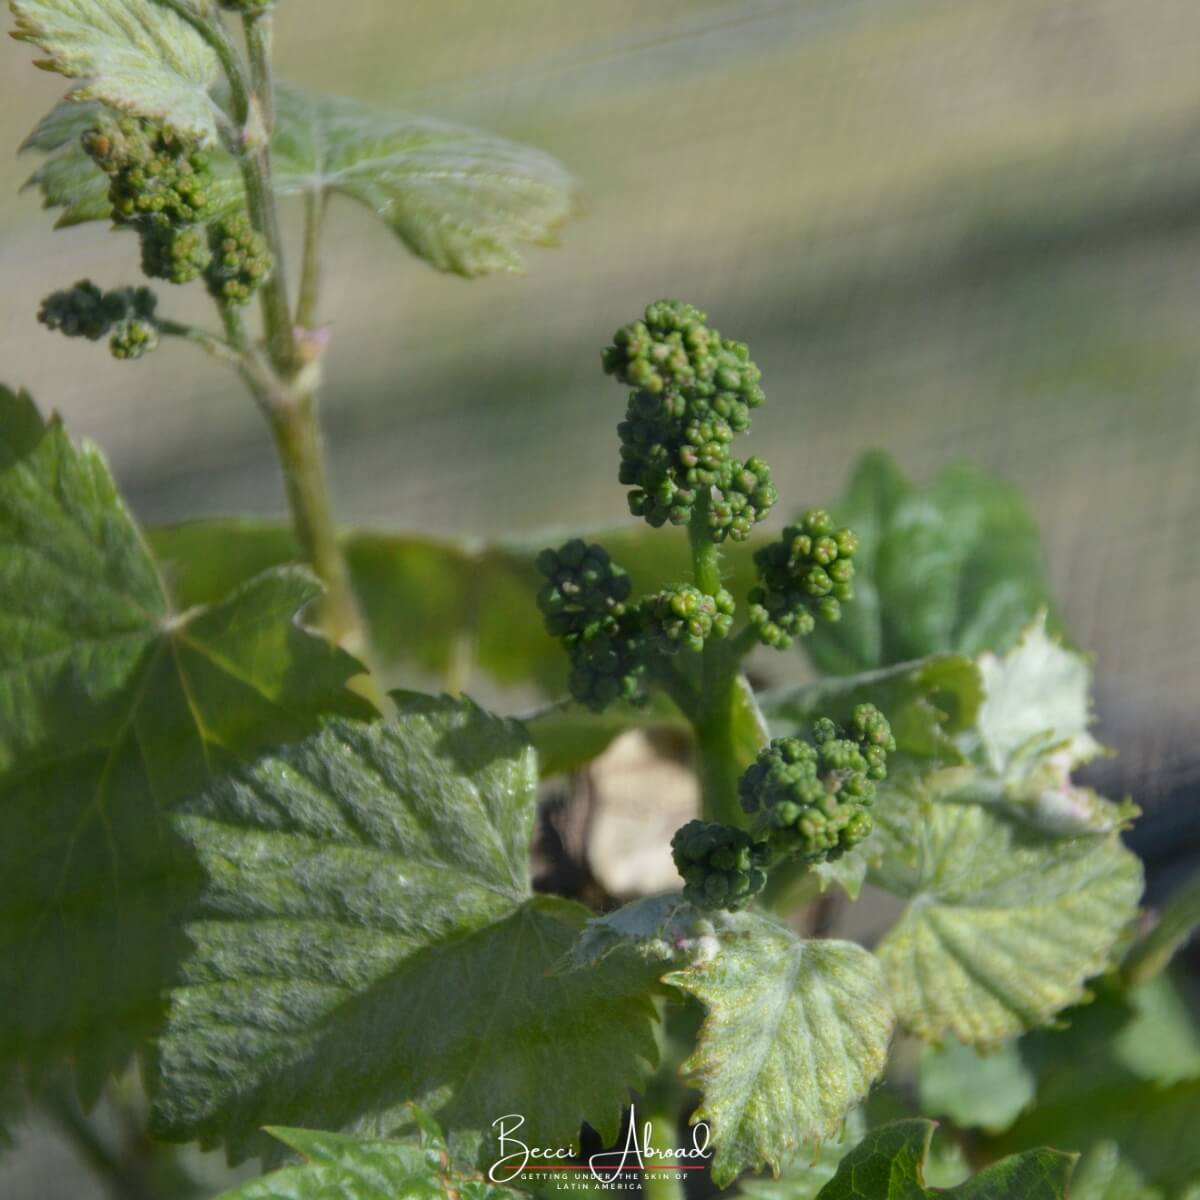 San Rafael (Mendoza) is the perfect spot for visiting local wineries and beautiful nature.